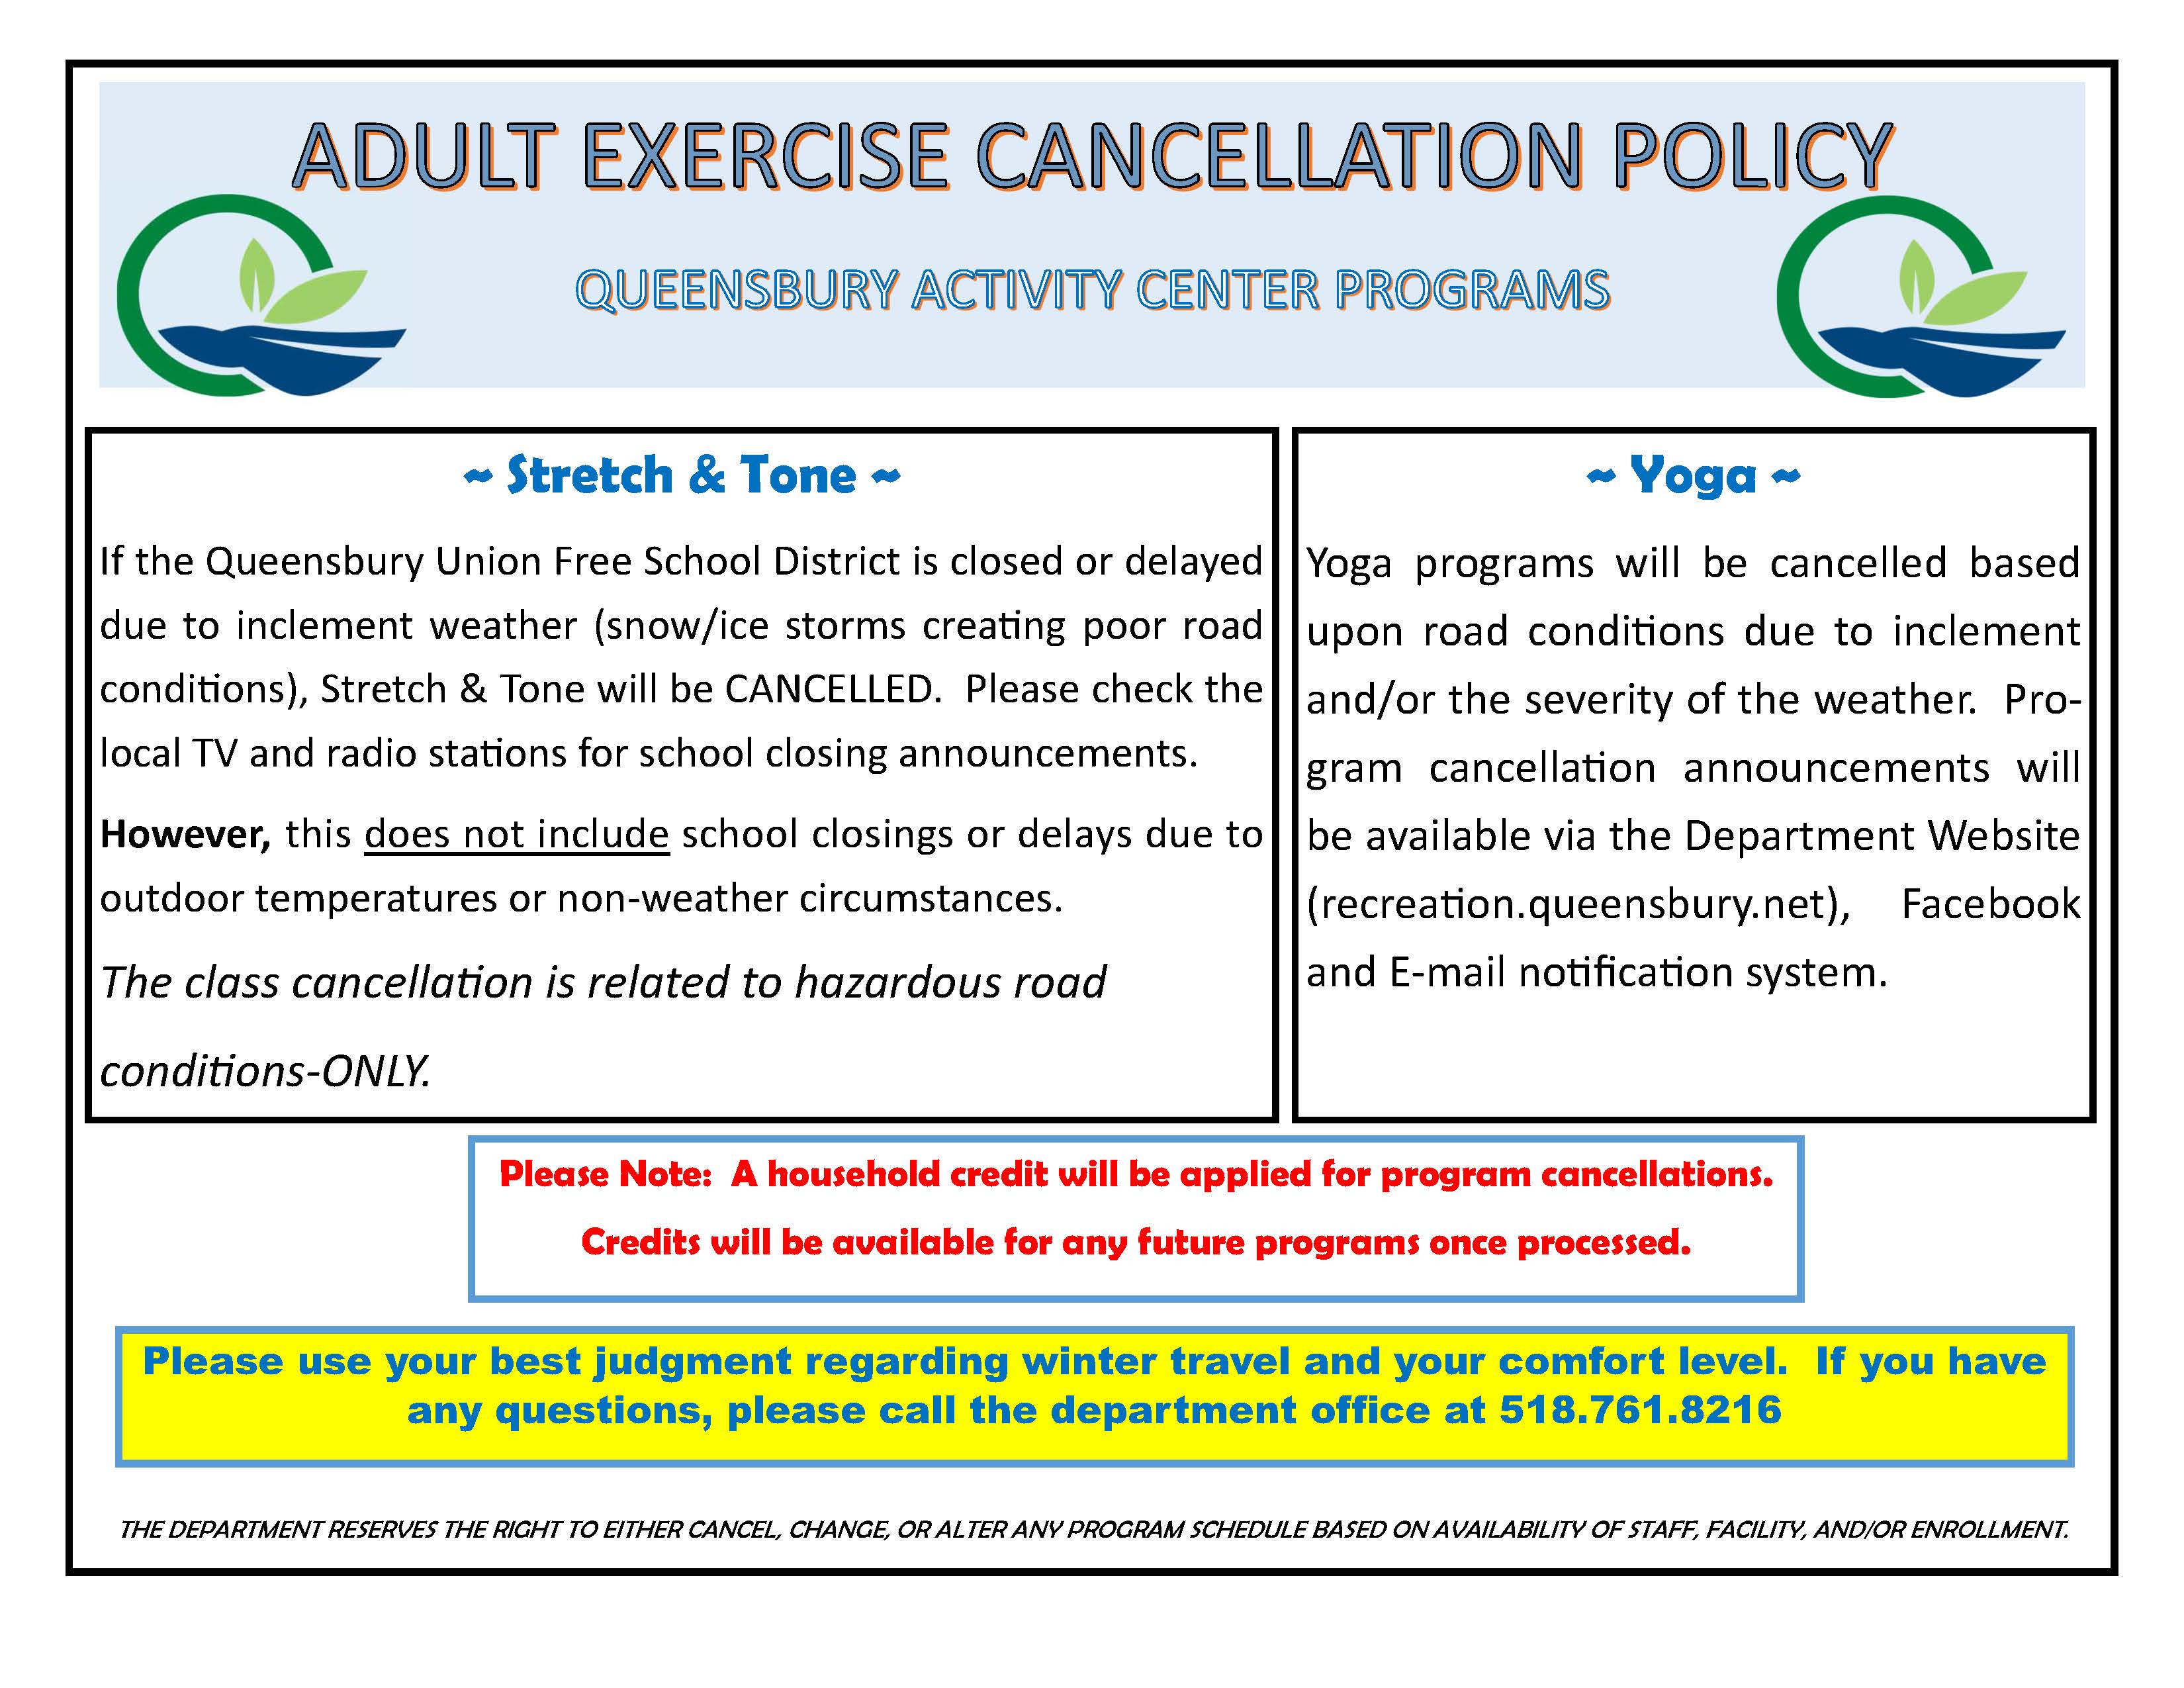 Adult Exercise Programs Cancelation Policy